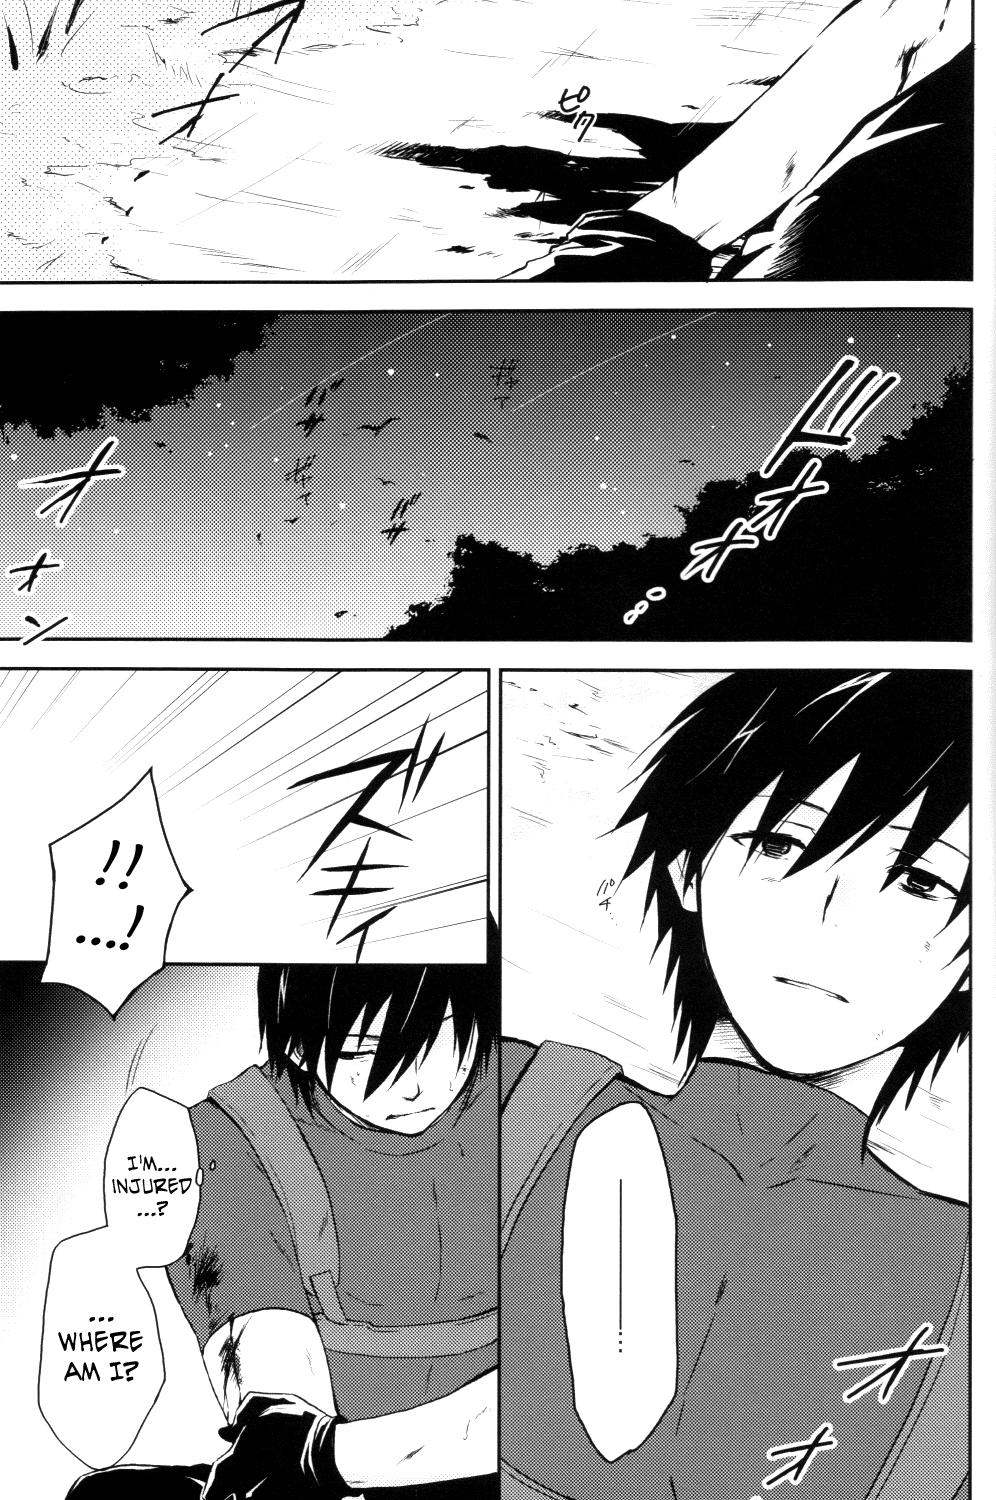 One Inran Explosion - Darker than black Yanks Featured - Page 5